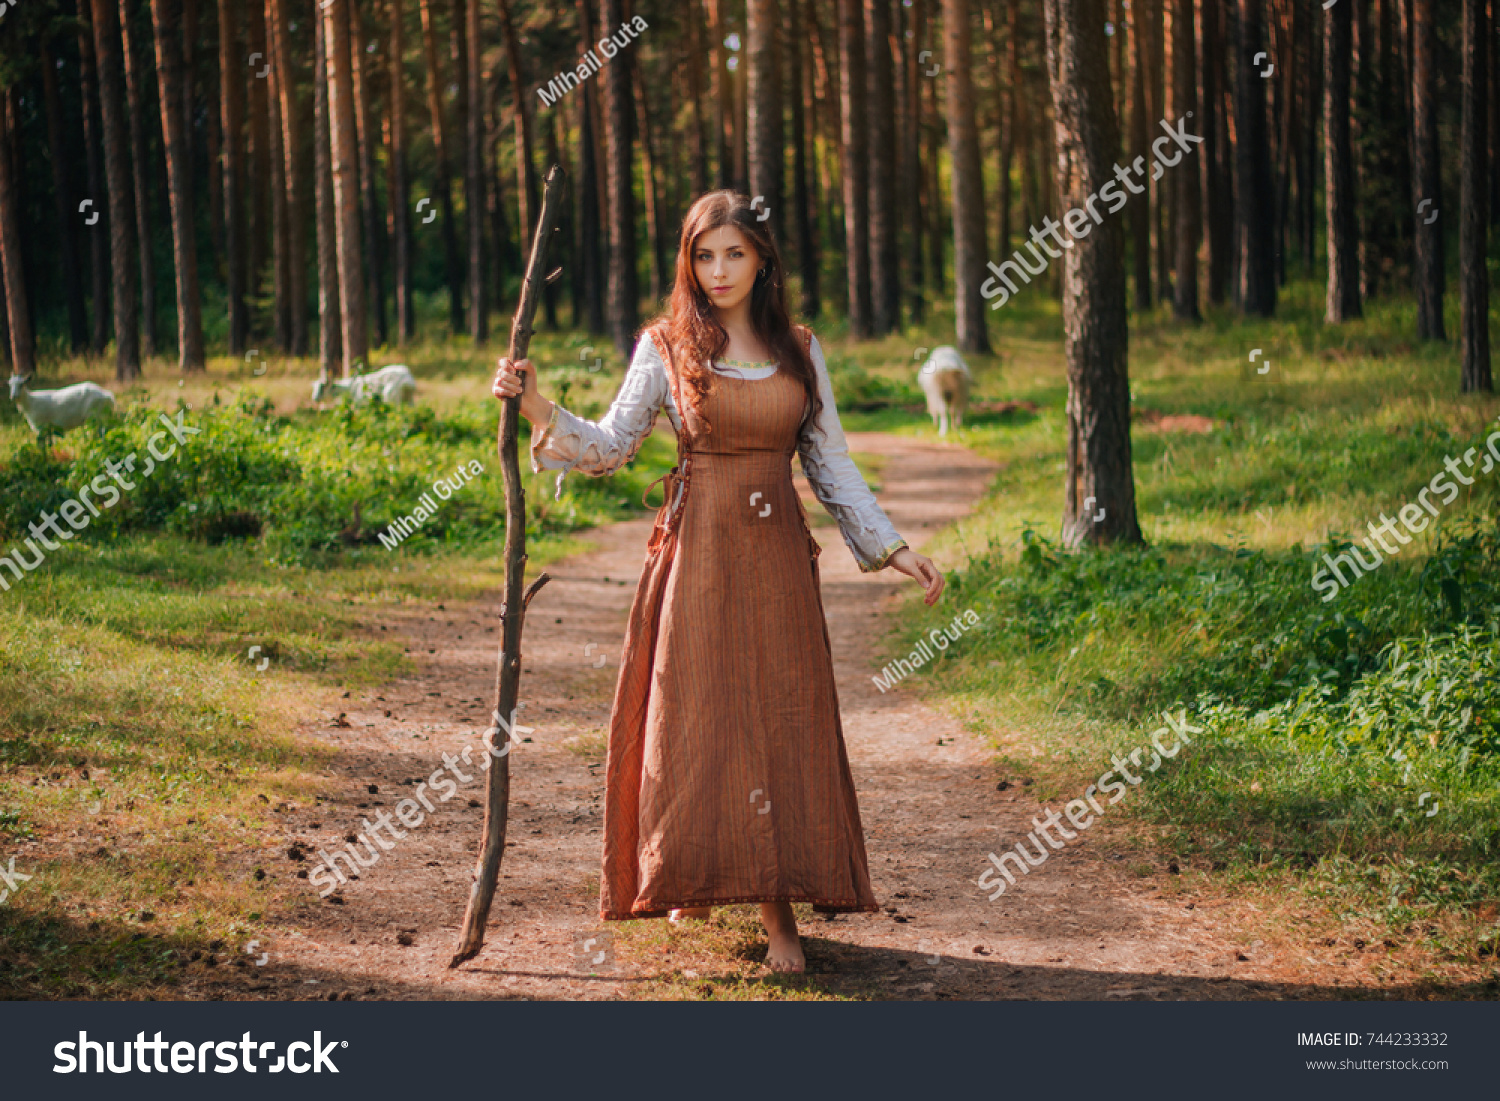 Young Beautiful Girl Medieval Cowboy Clothes Stock Photo 744233332 ...